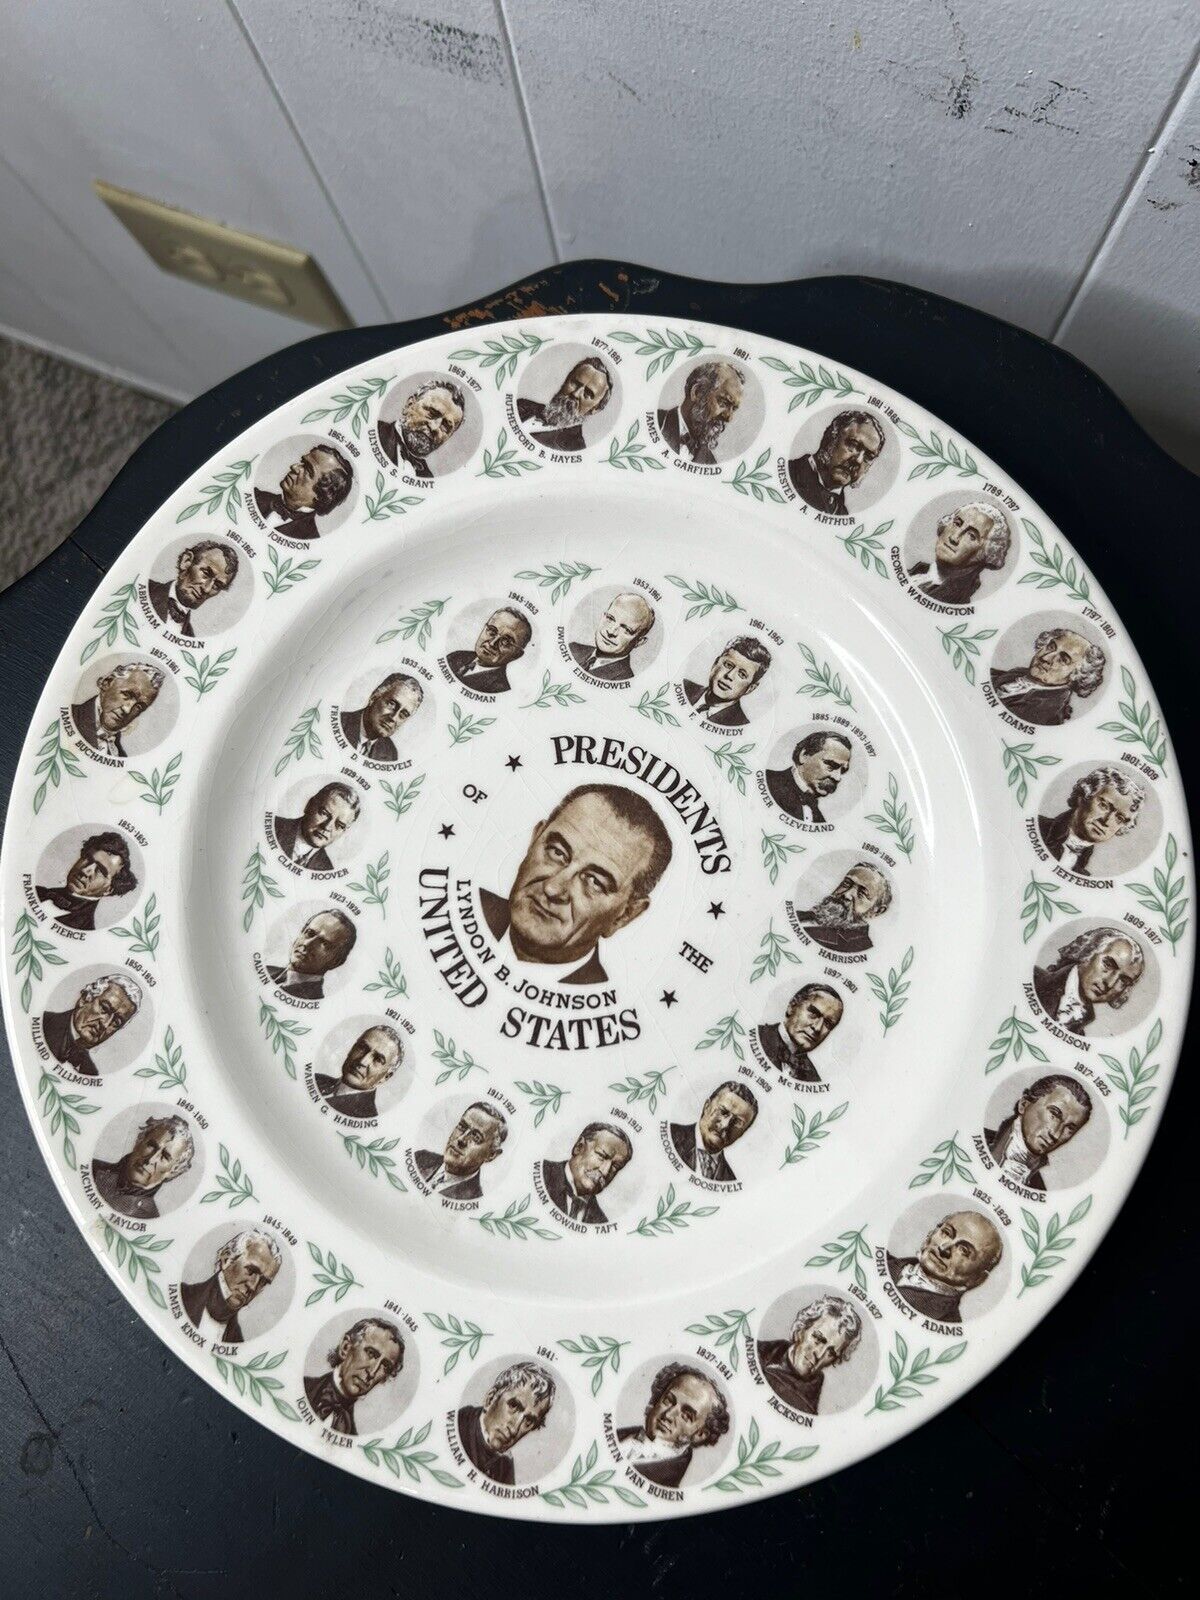 Vintage 1960s Presidents Of The United States John F Kennedy Collector Plate 10”